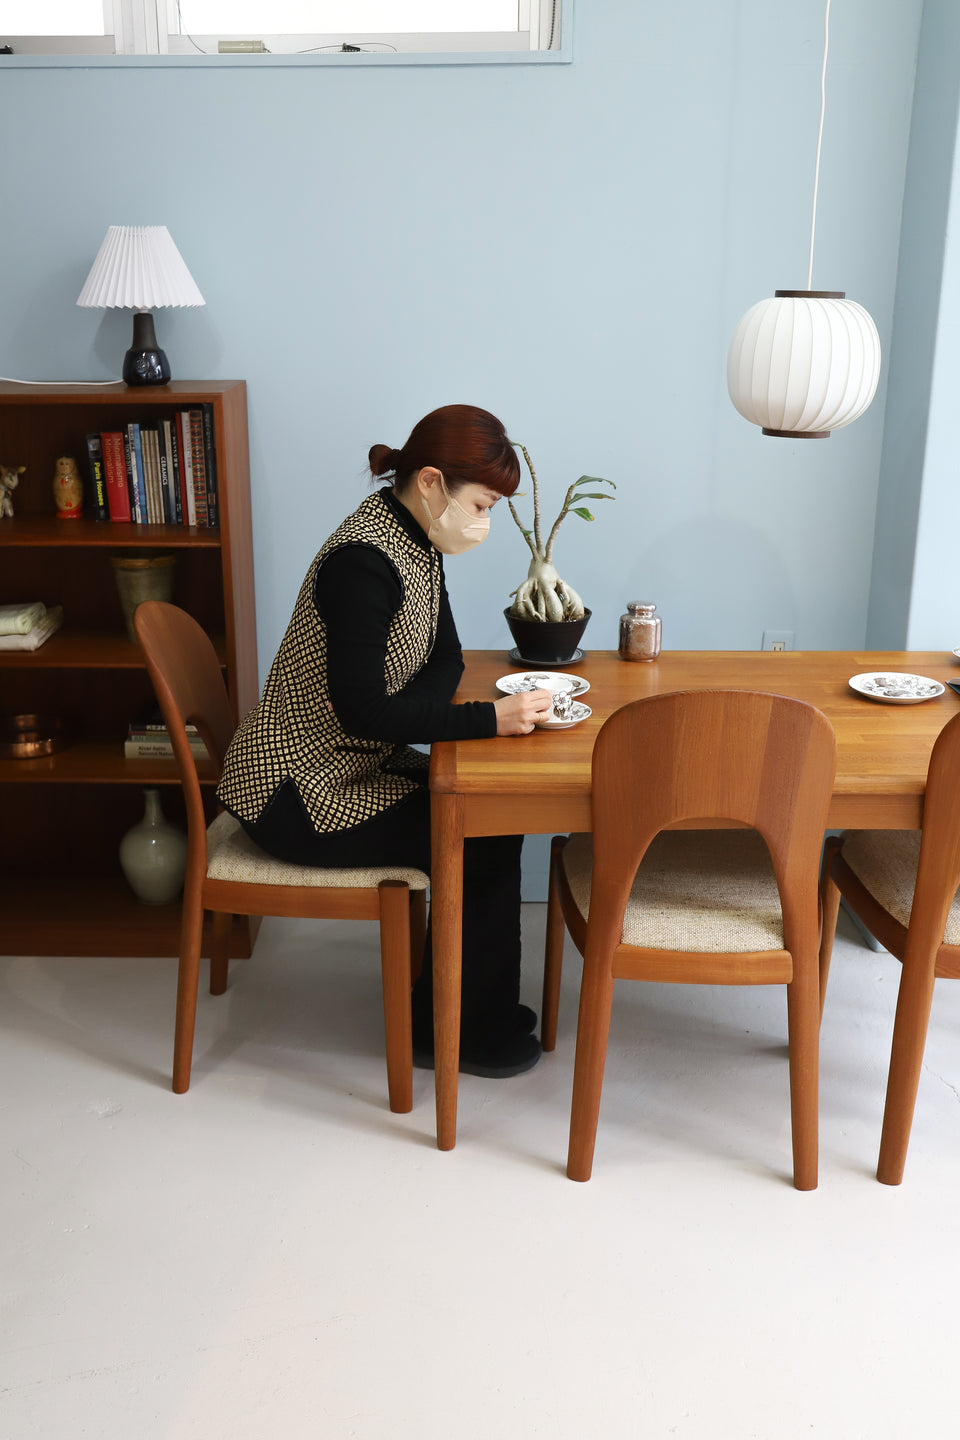 KOEFOEDS HORNSLET Dining Chair Morten Niels Koefoed/デンマークヴィンテージ ダイニングチェア 椅子 ニールス・コフォード